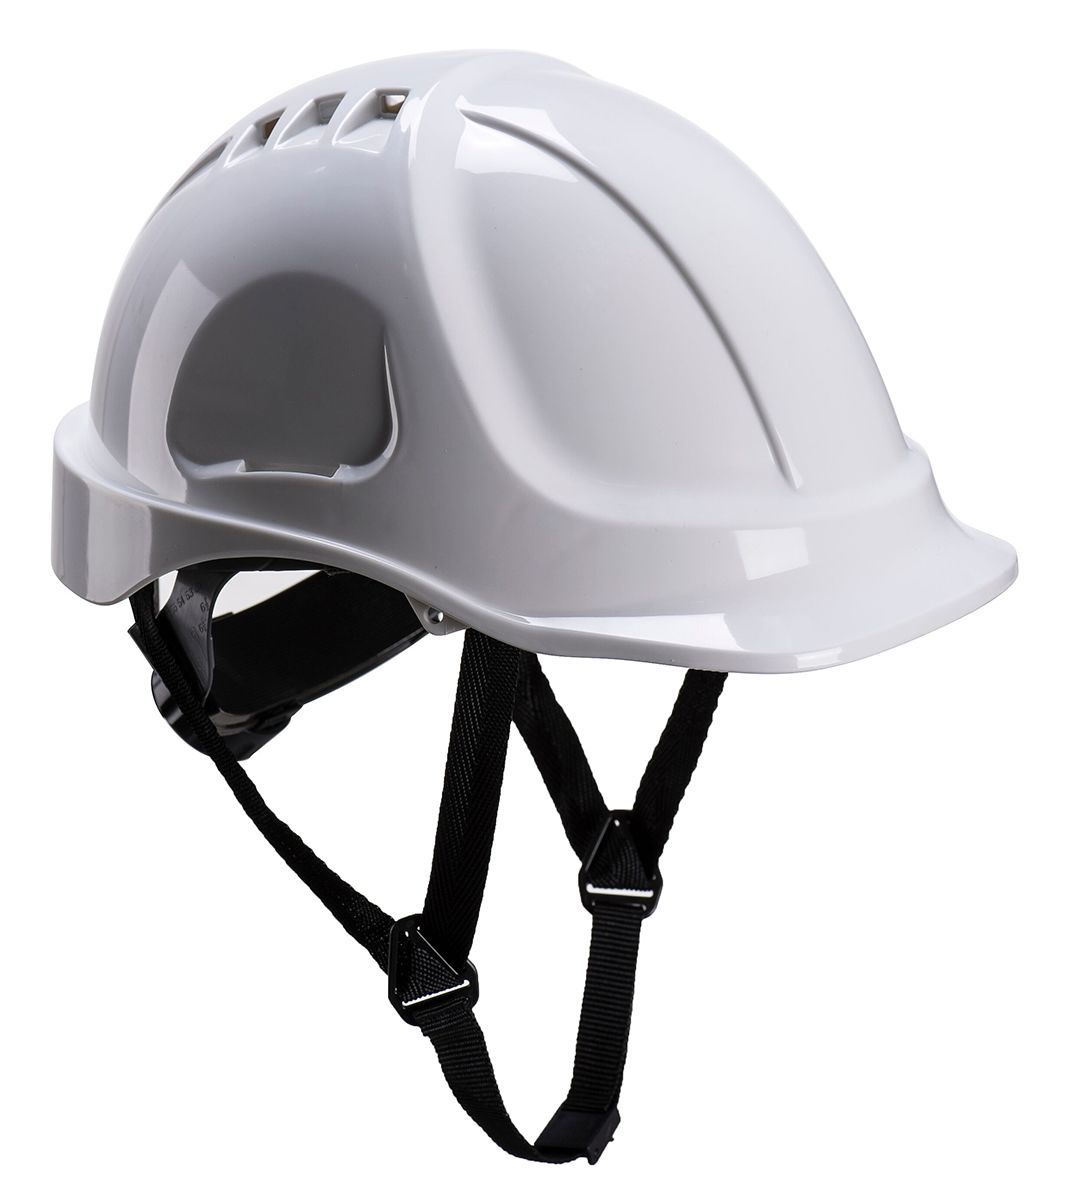 RS PRO White Safety Helmet Adjustable, Ventilated